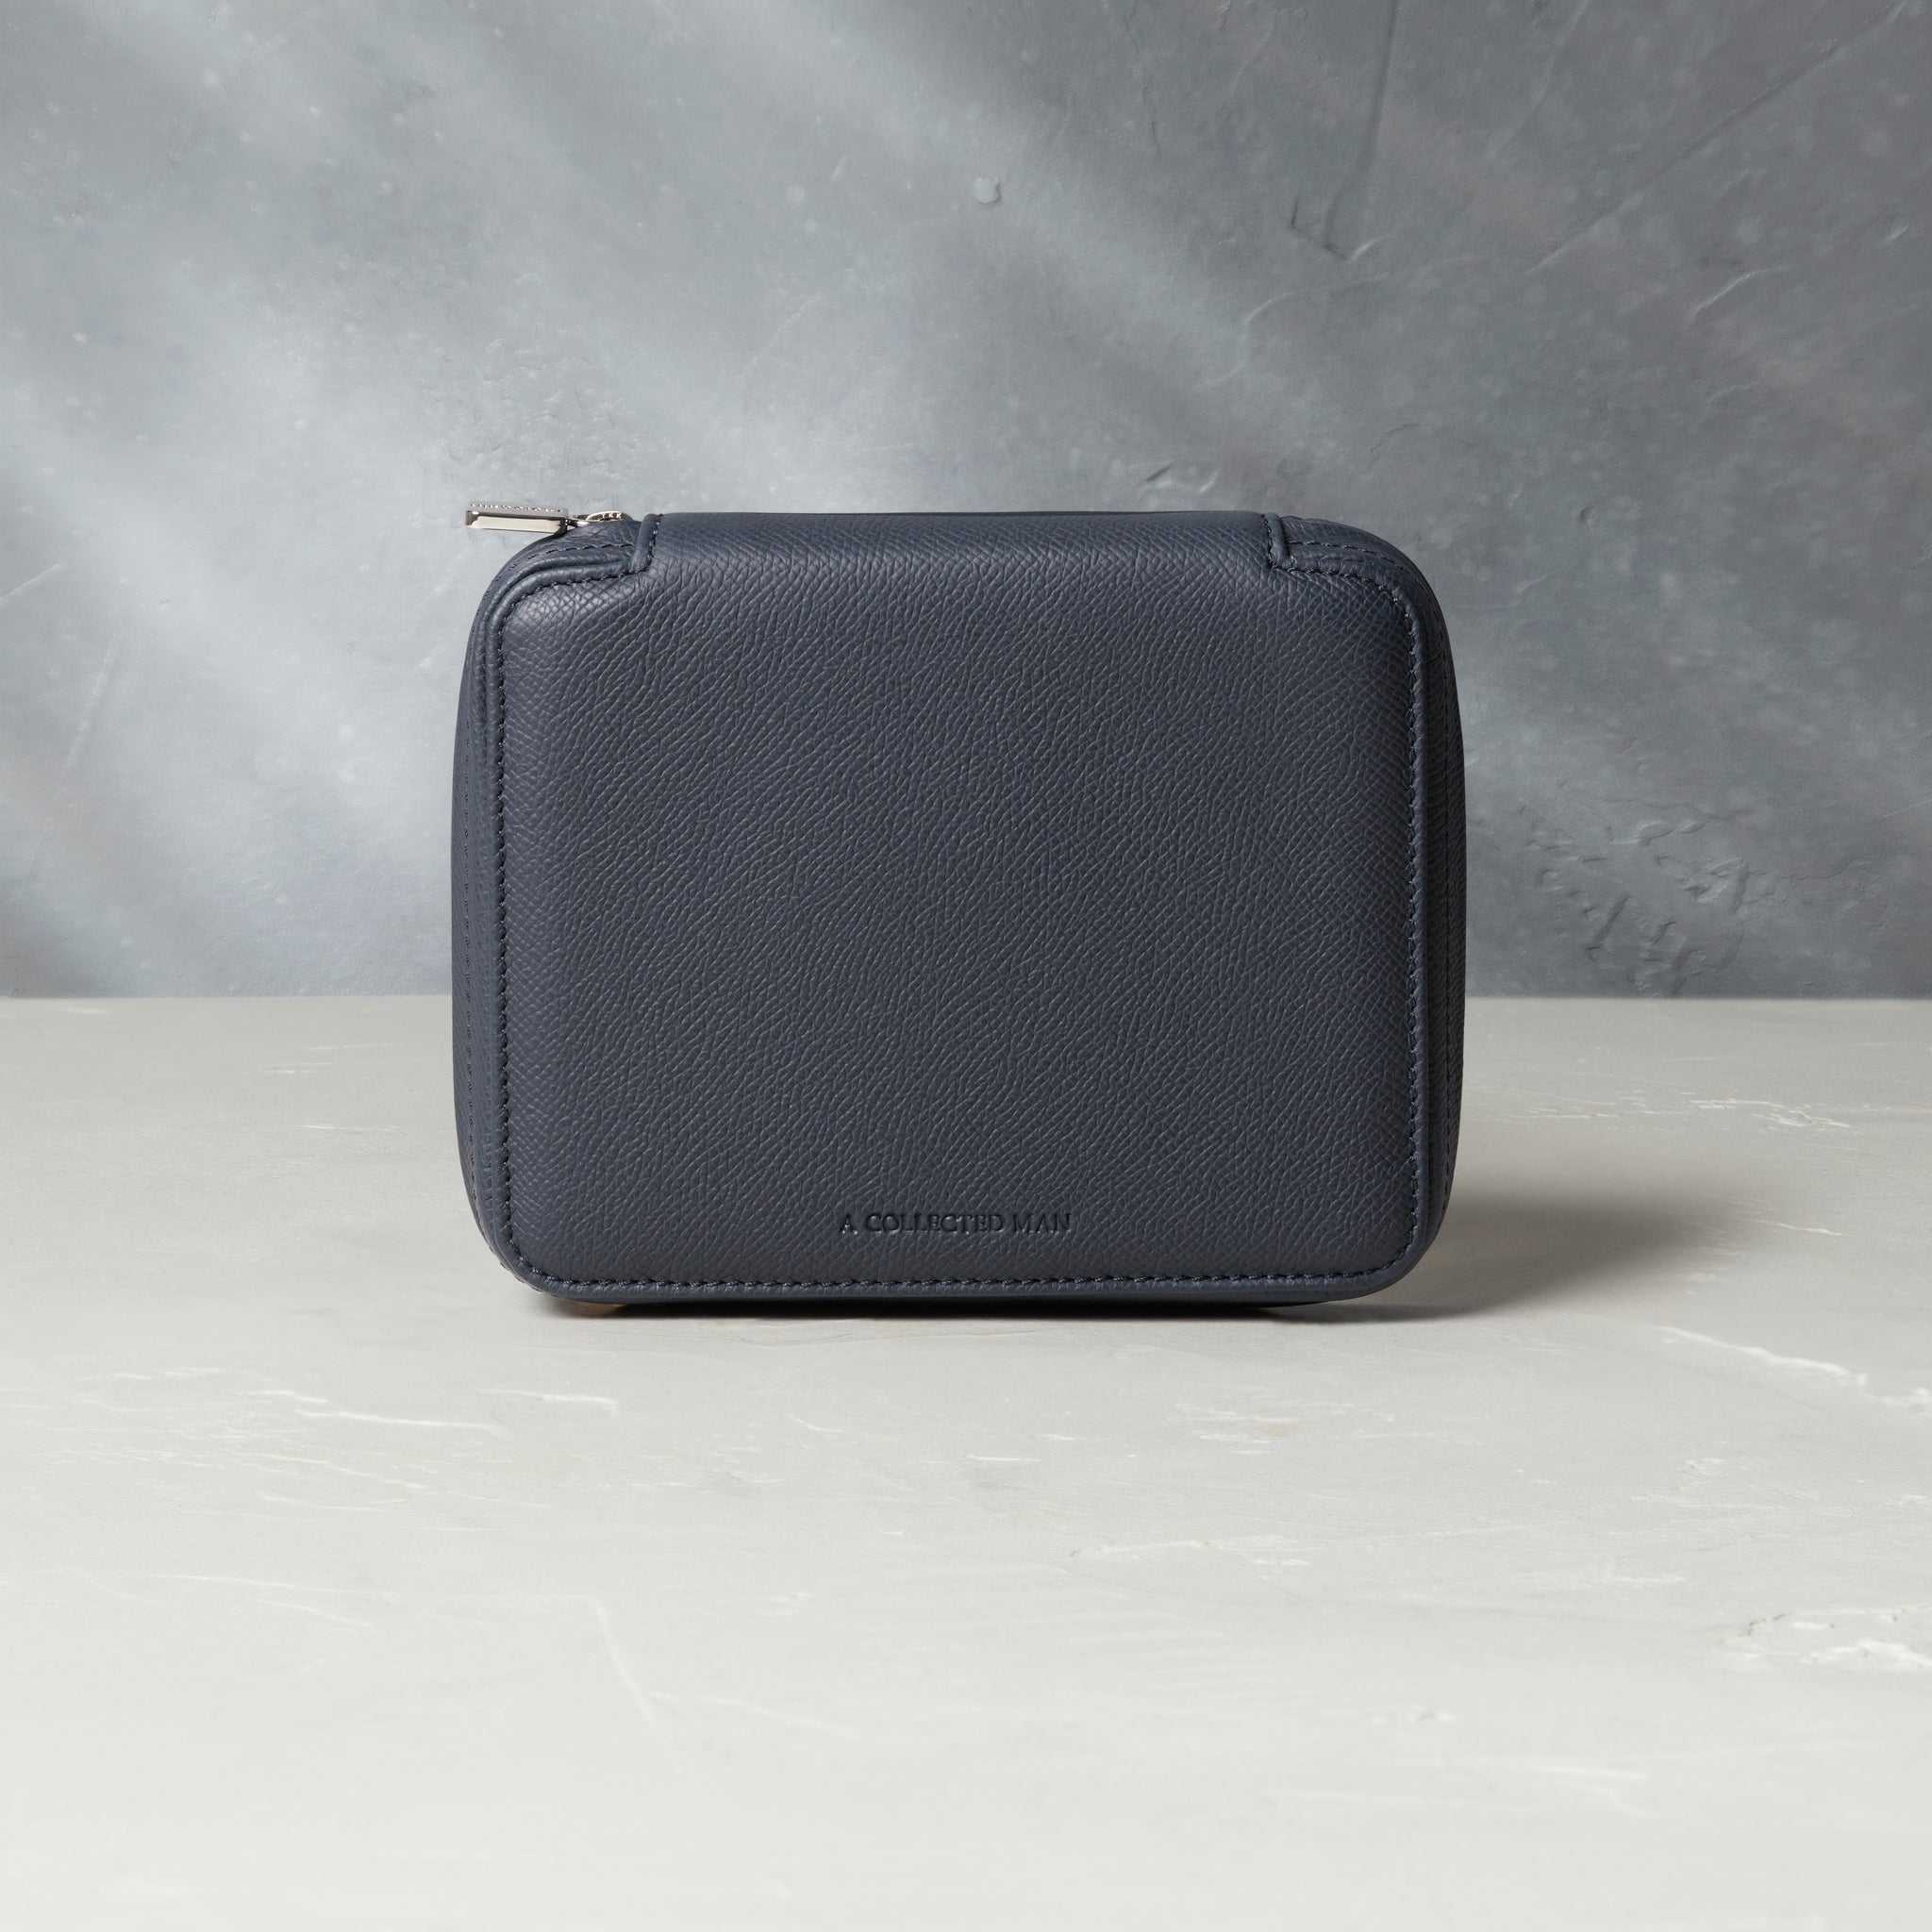 Four-watch slim folio in midnight blue grained leather, Handmade in France by skilled craftsmen from classic, midnight blue grained leather, it’s a slim case with a tactile, natural feel | A Collected Man